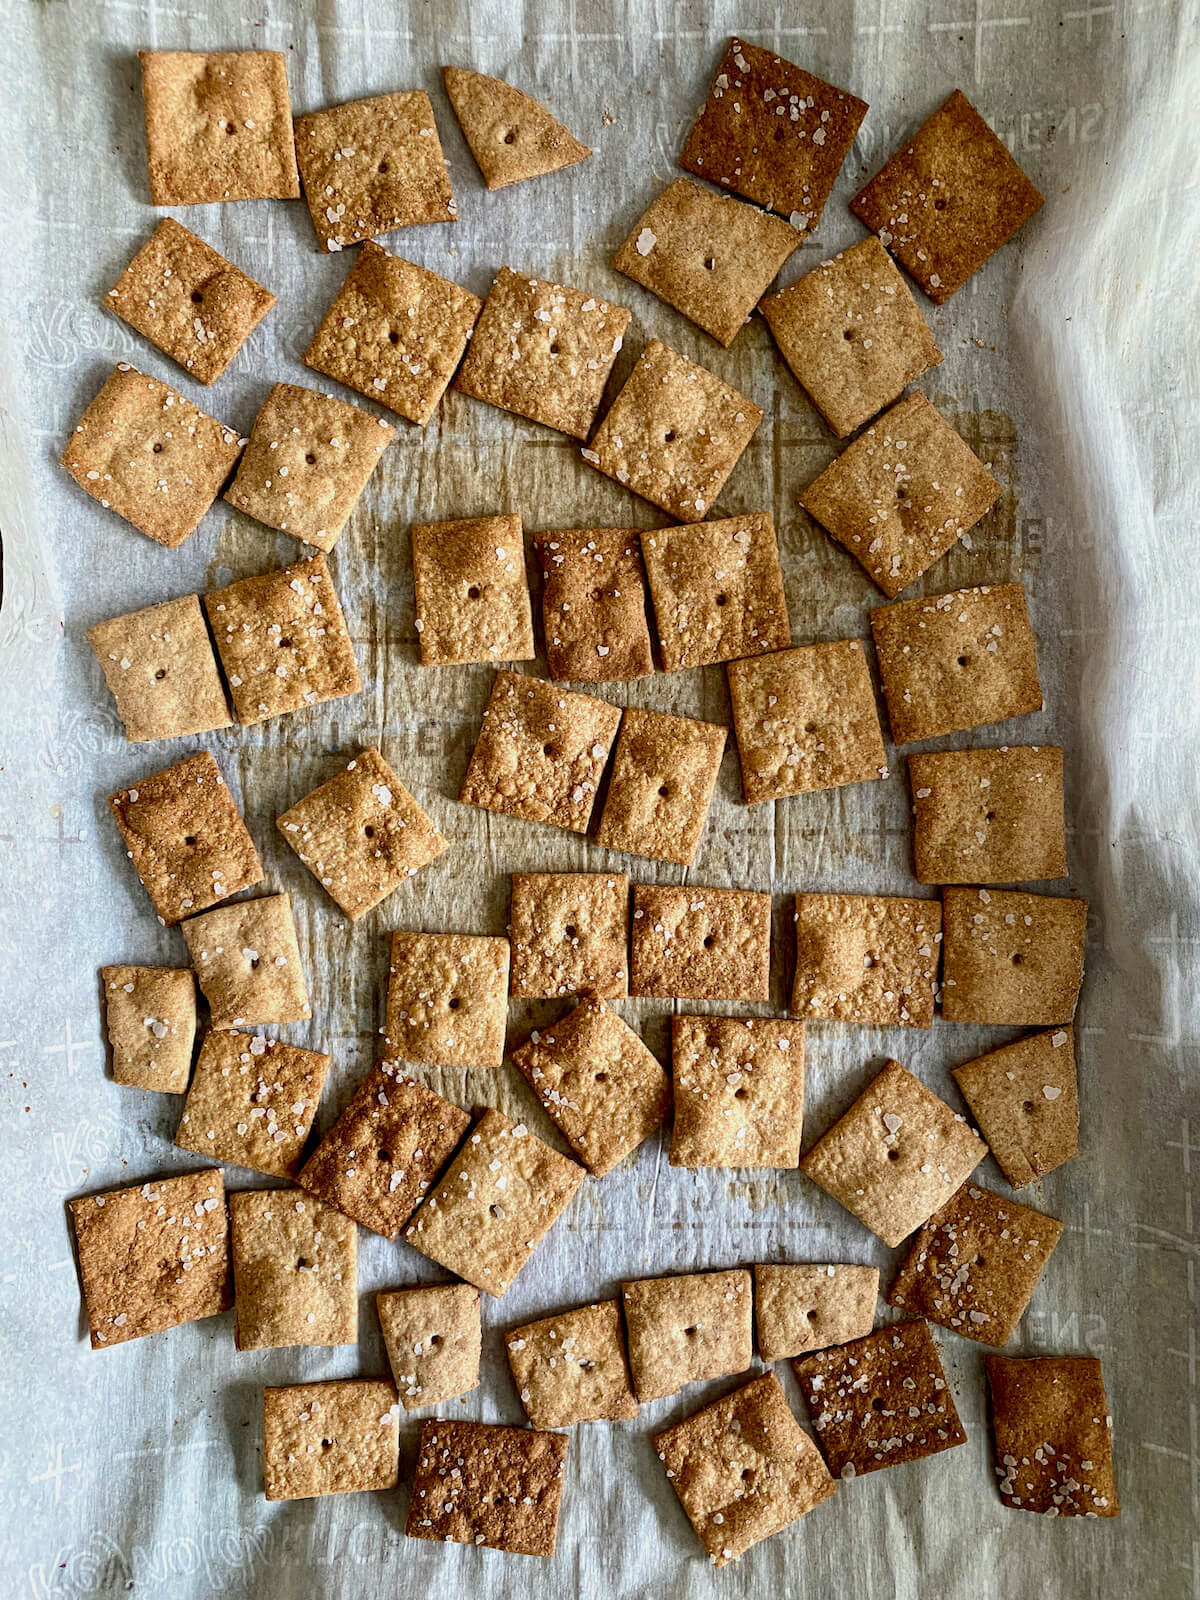 Baked sourdough wheat crackers on a baking sheet lined with parchment paper.